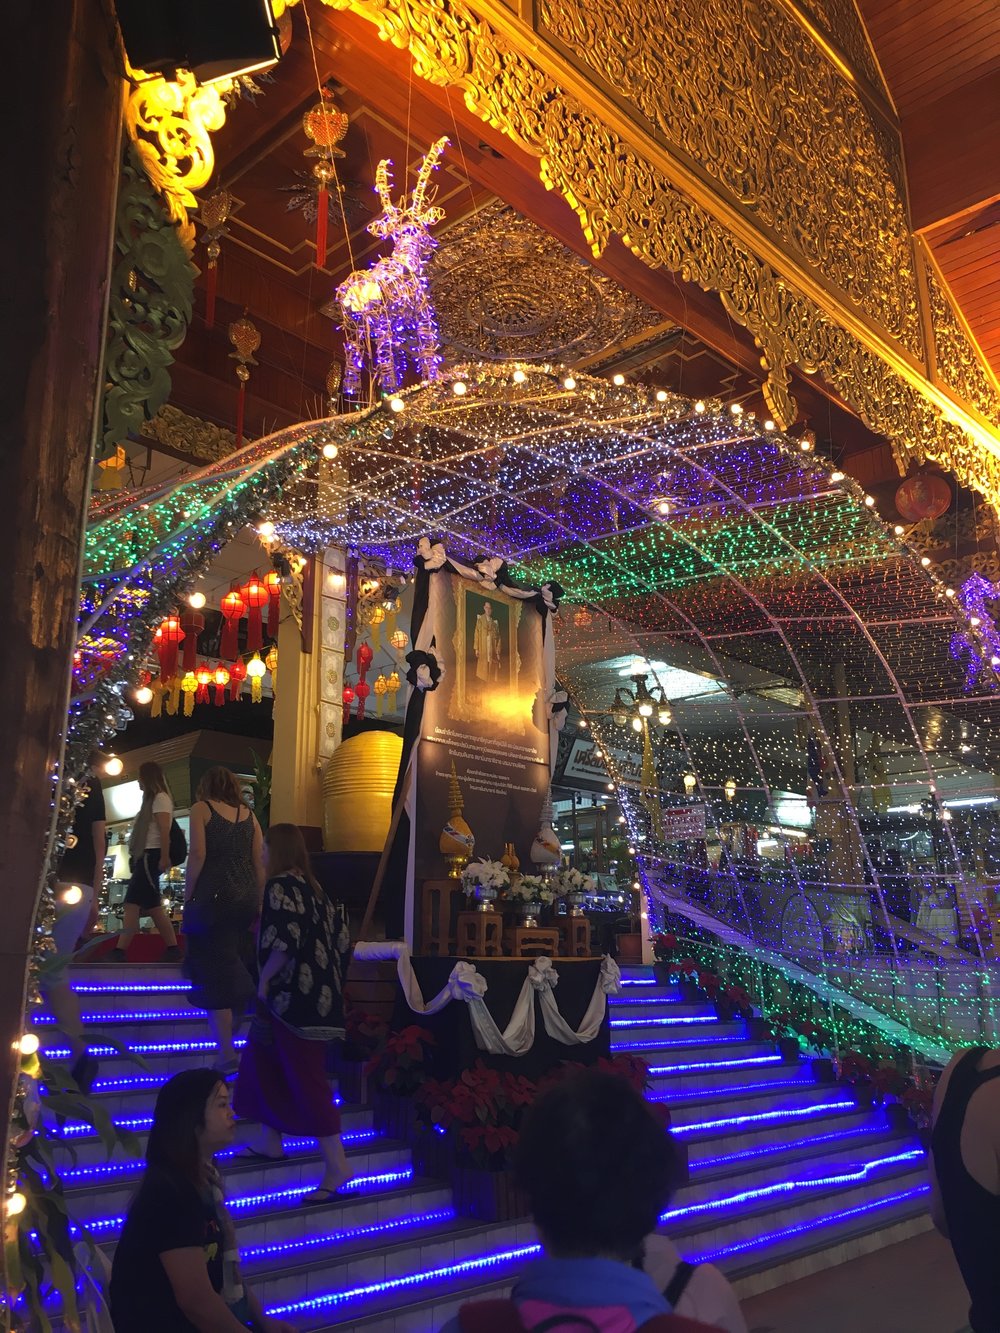 Just one of the many entrances to the Night Bazaar.